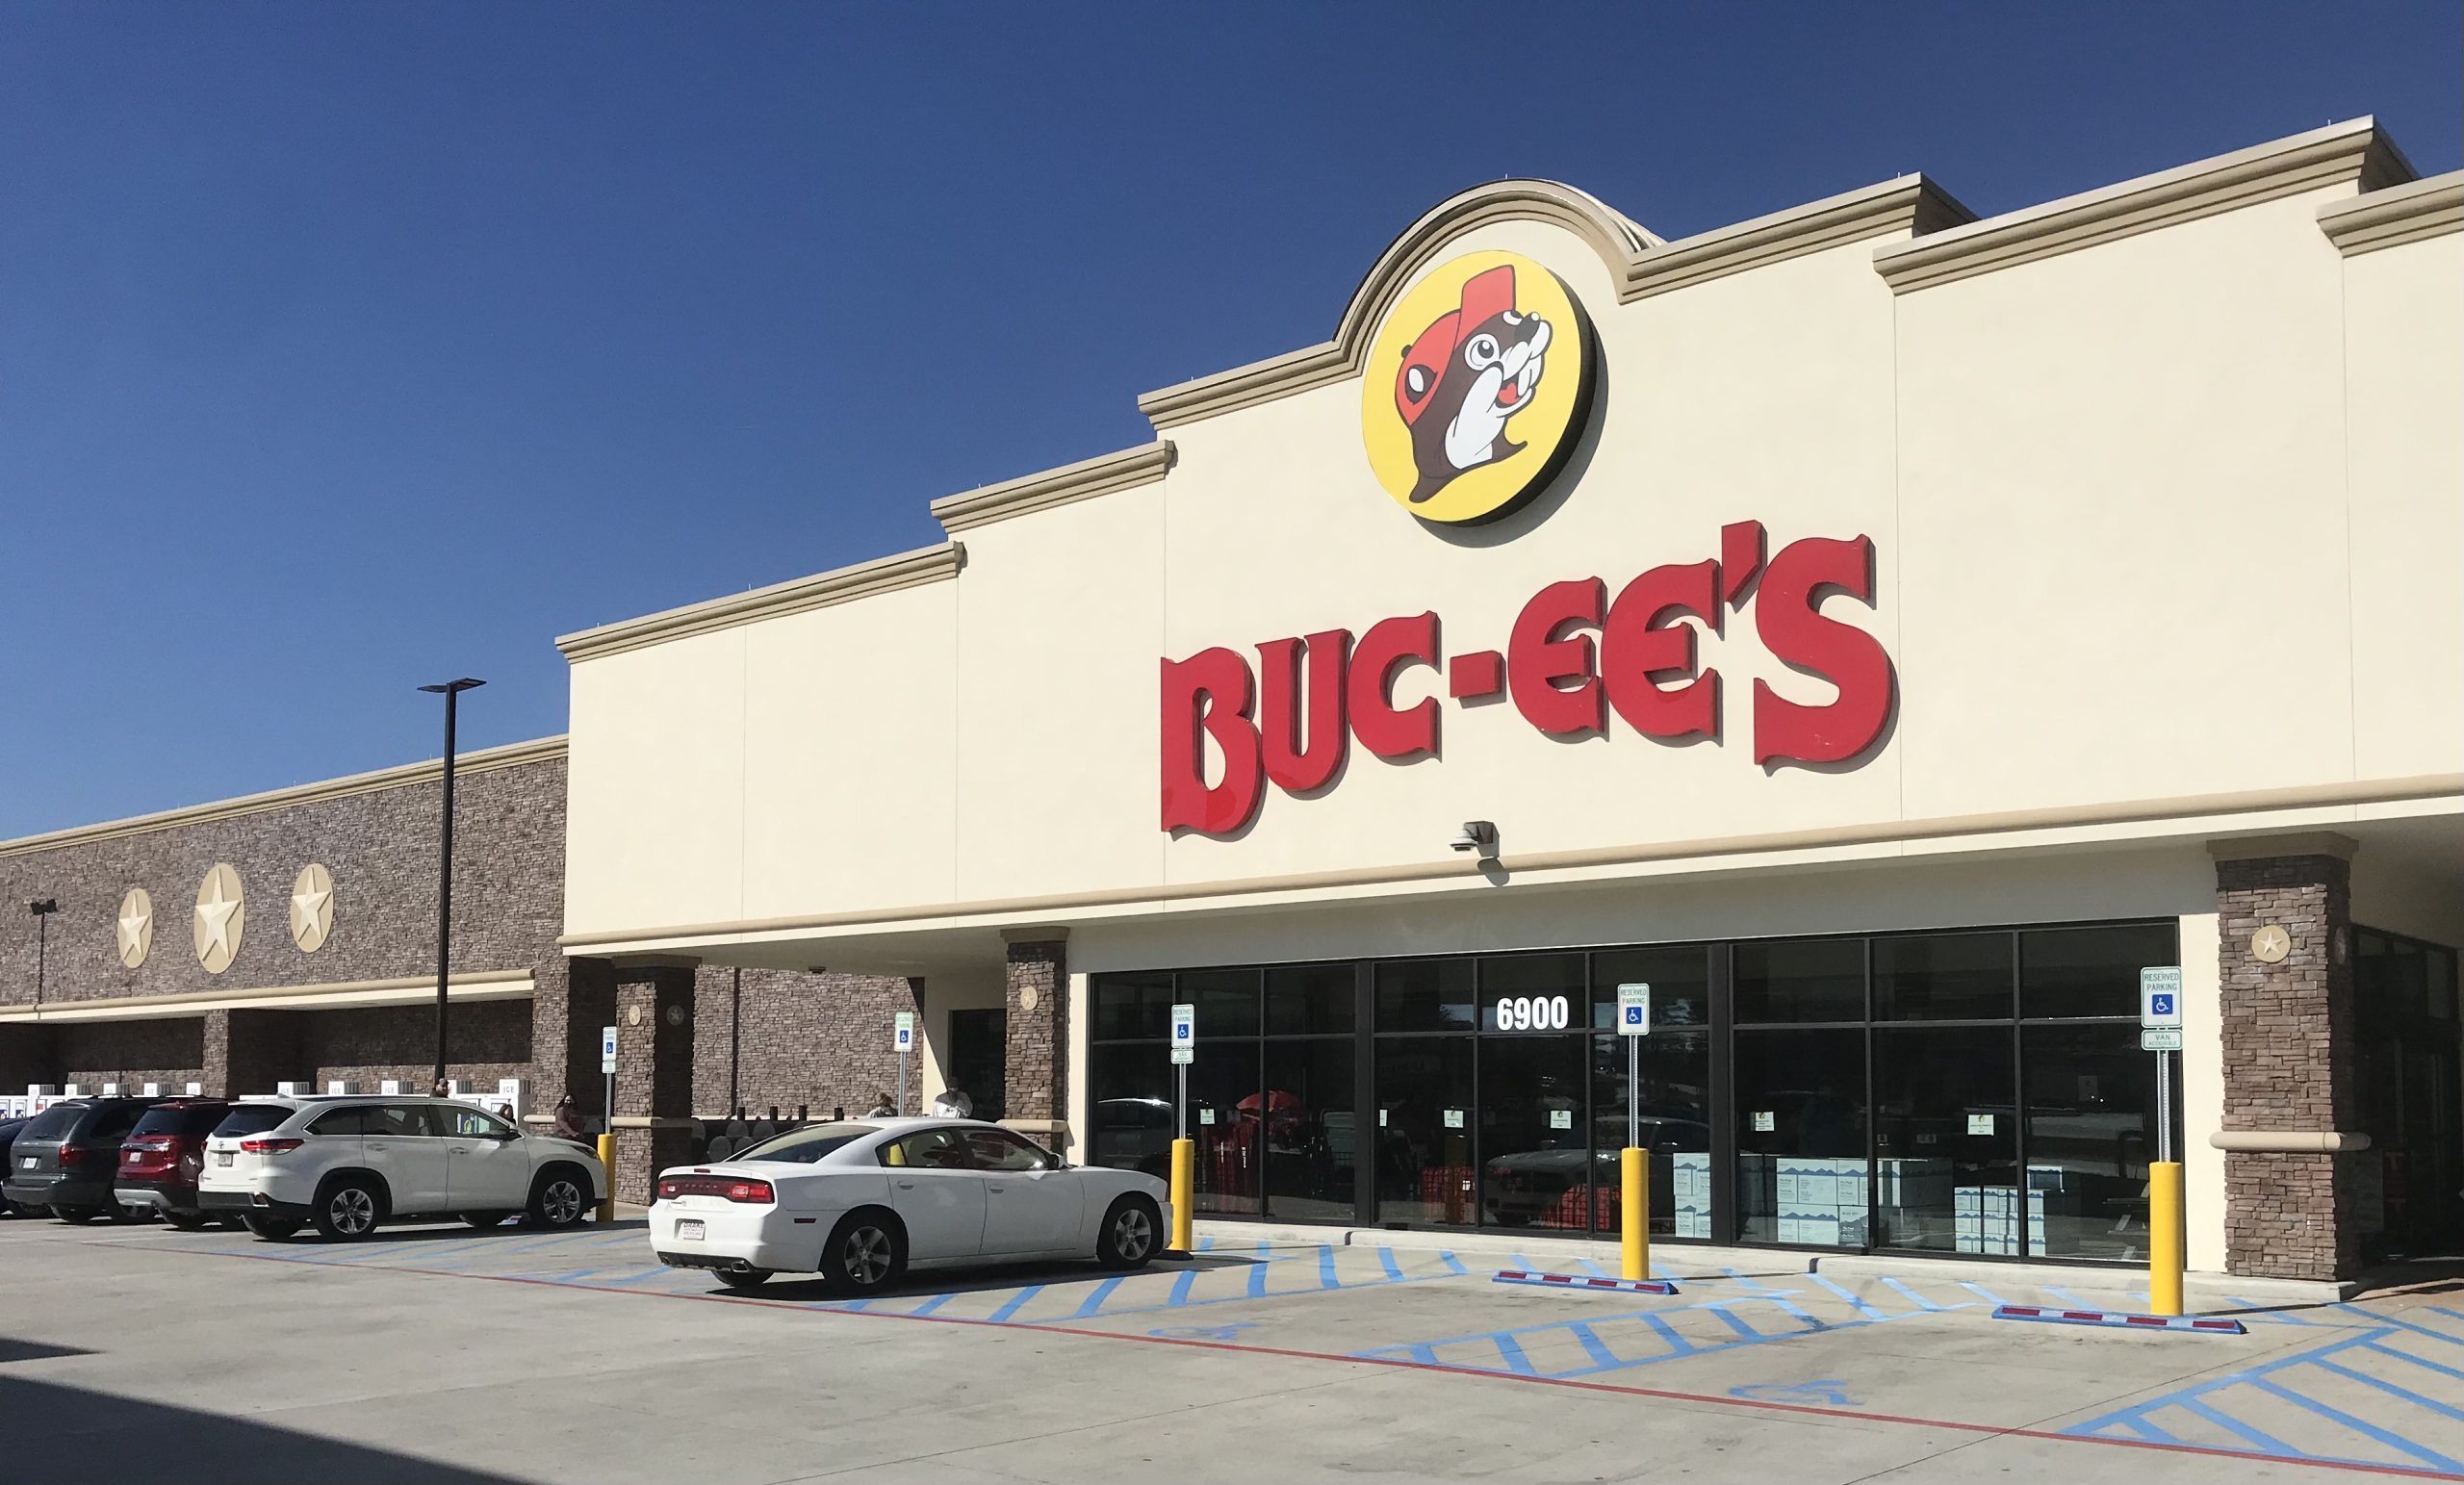 Buc-ee’s has clean environmental history in Texas, according to Daily Citizen records-check